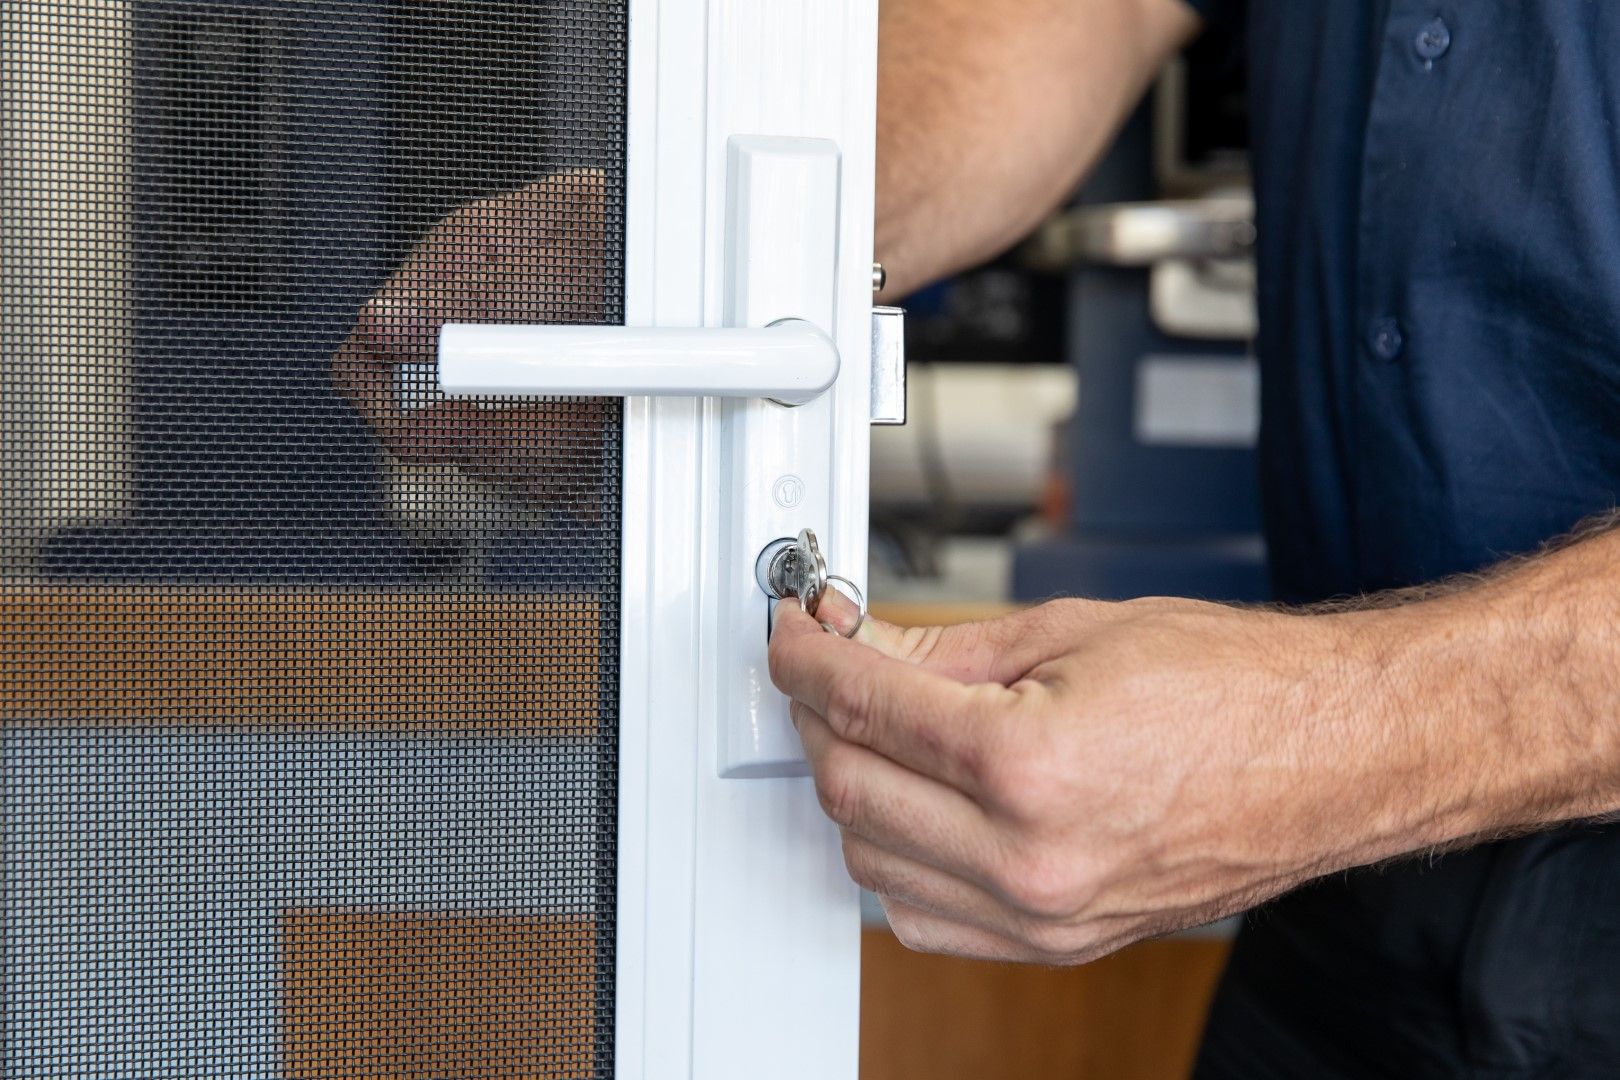 Barrenjoey locksmiths and alarms, home security, security system, safes, cctv, alarms, commercial security system, surveillance system, video surveillance, access control systems, modern security systems, security doors, screen doors, intercoms, back to base monitoring, security system installation